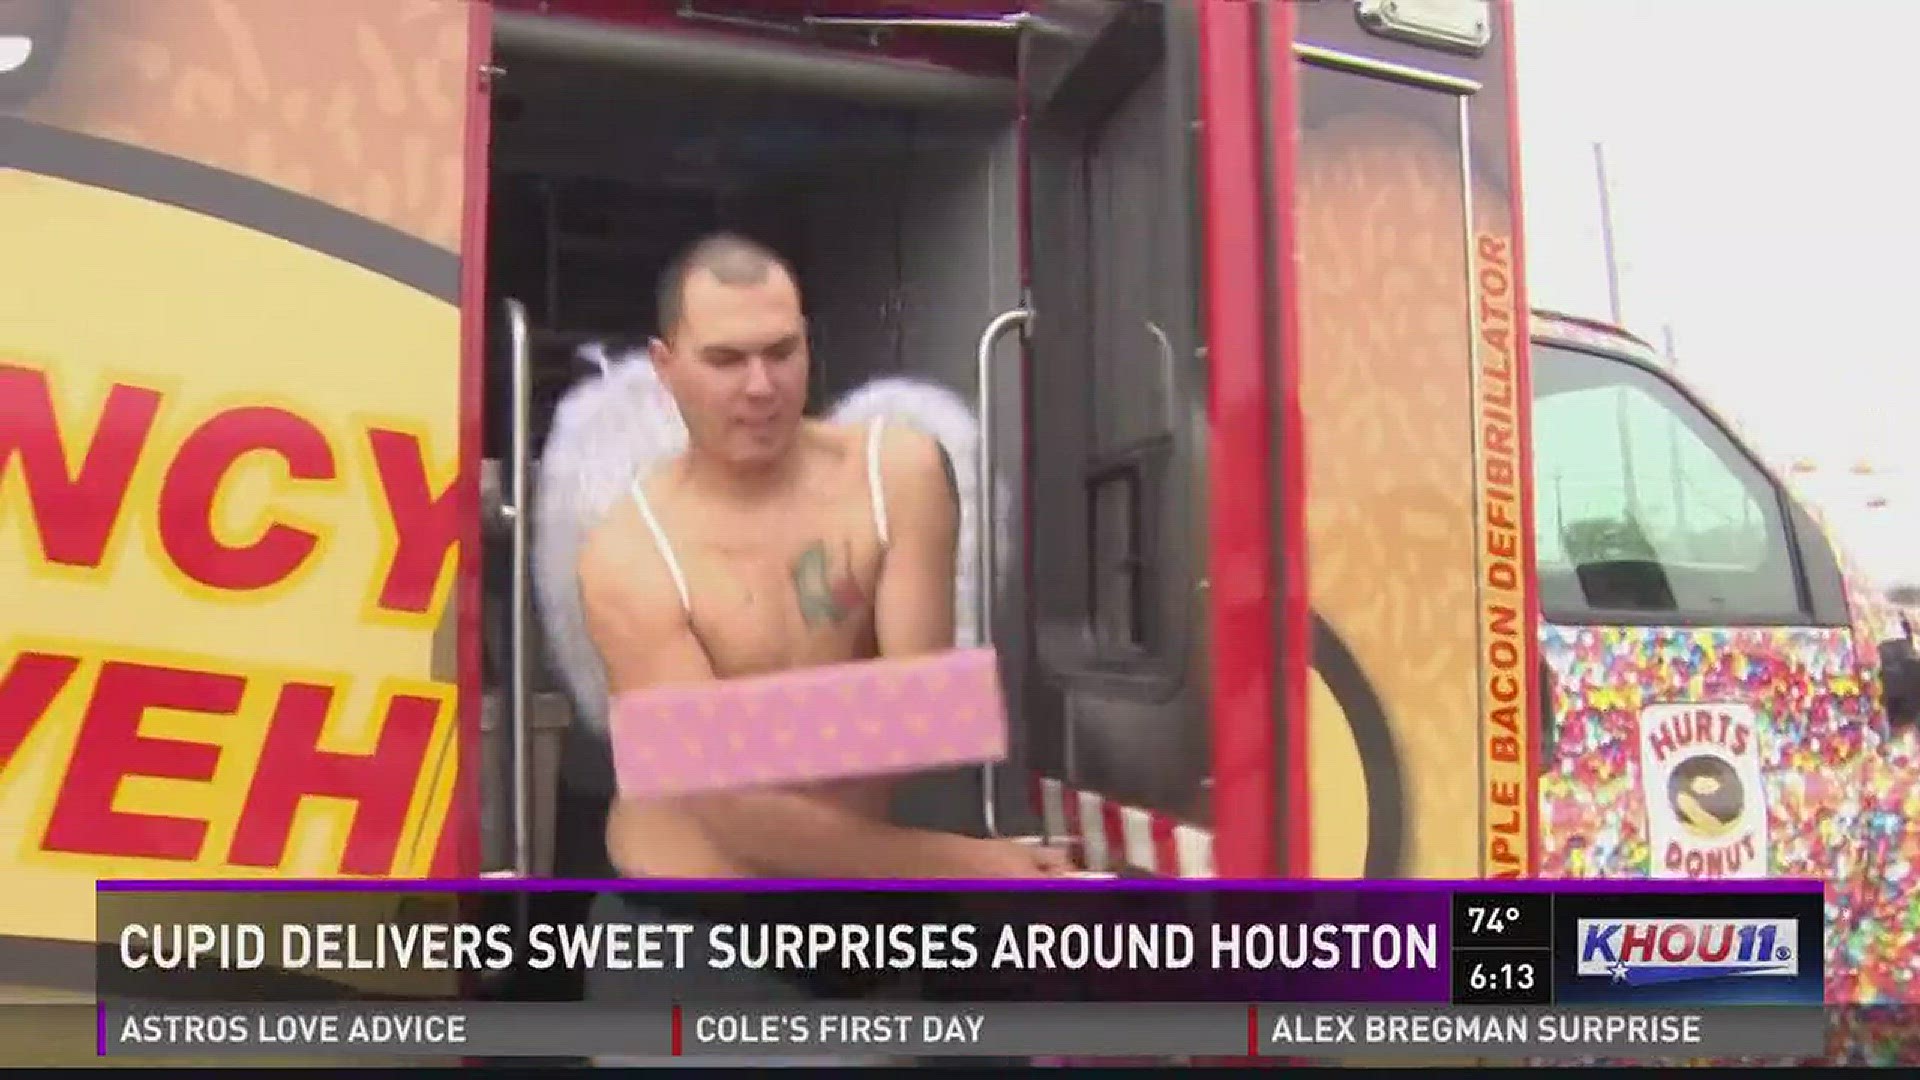 Cupid spread love and doughnuts throughout the Houston area this Valentine's Day.